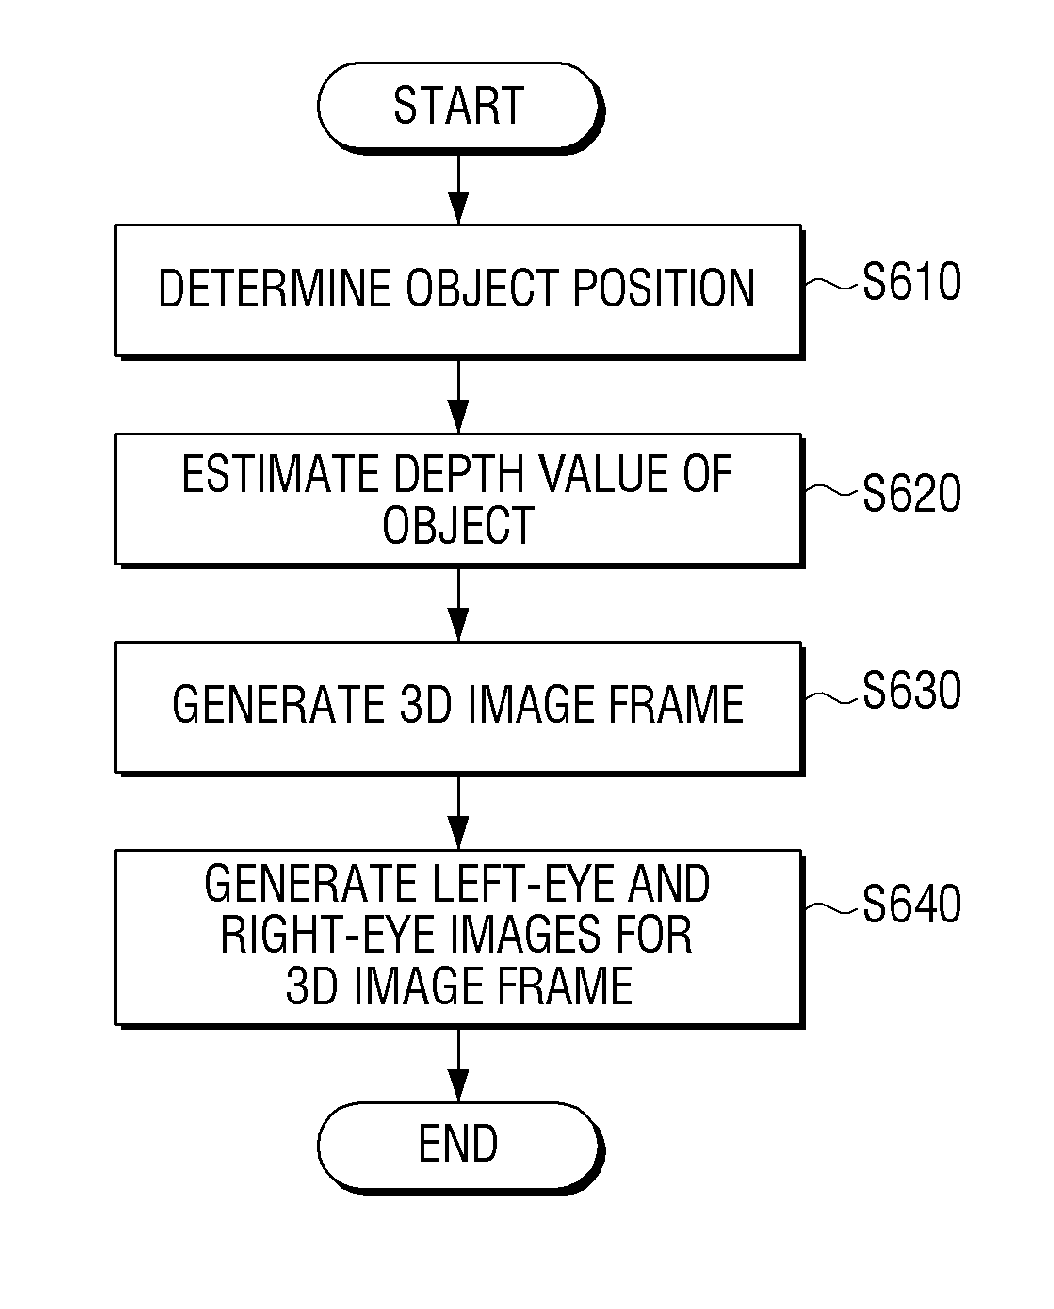 Apparatus and method for display